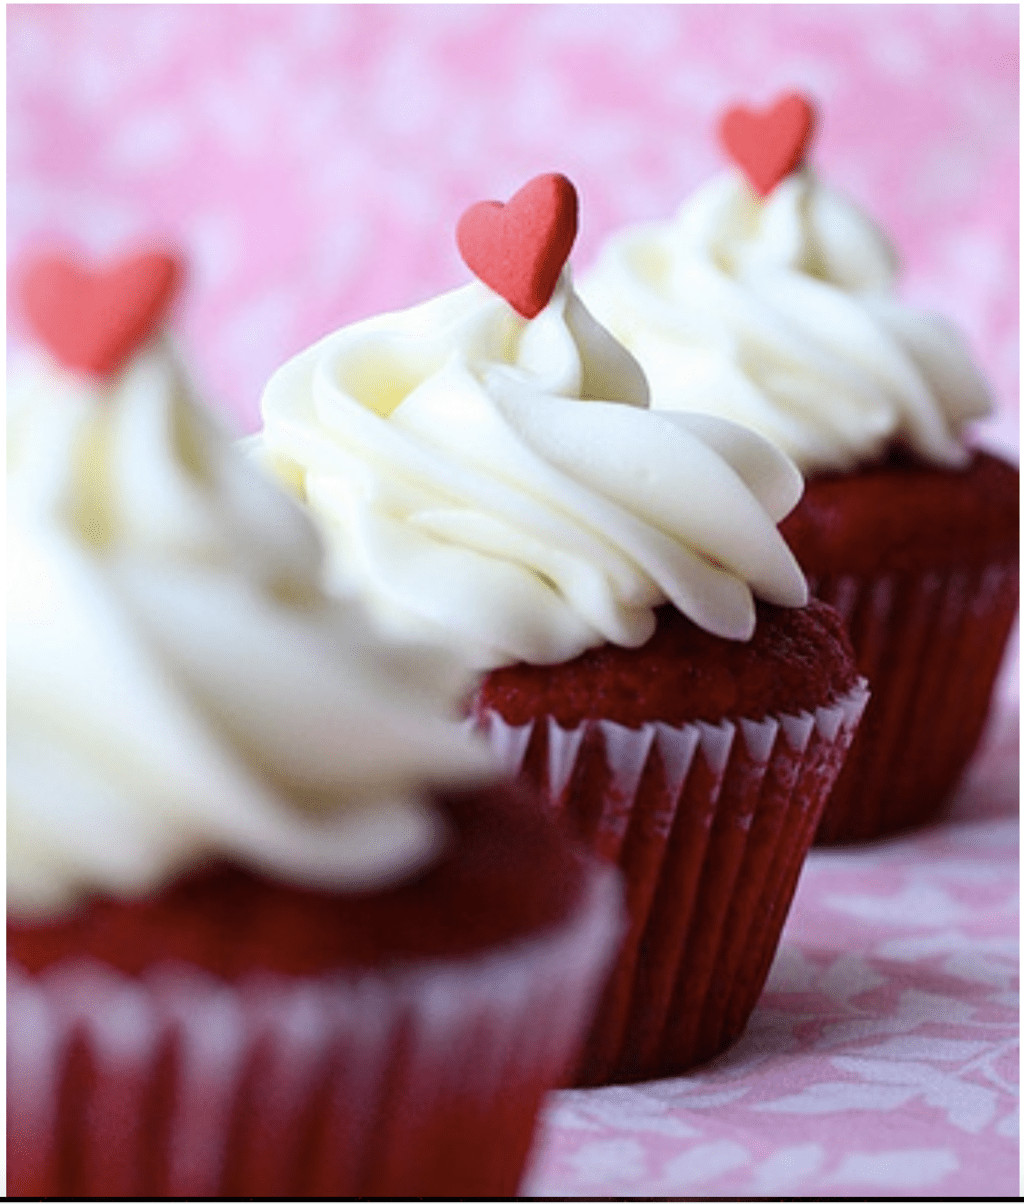 Valentines Day Cupcakes Recipes
 13 Easy To Make Valentine s Day Cupcakes SoCal Field Trips